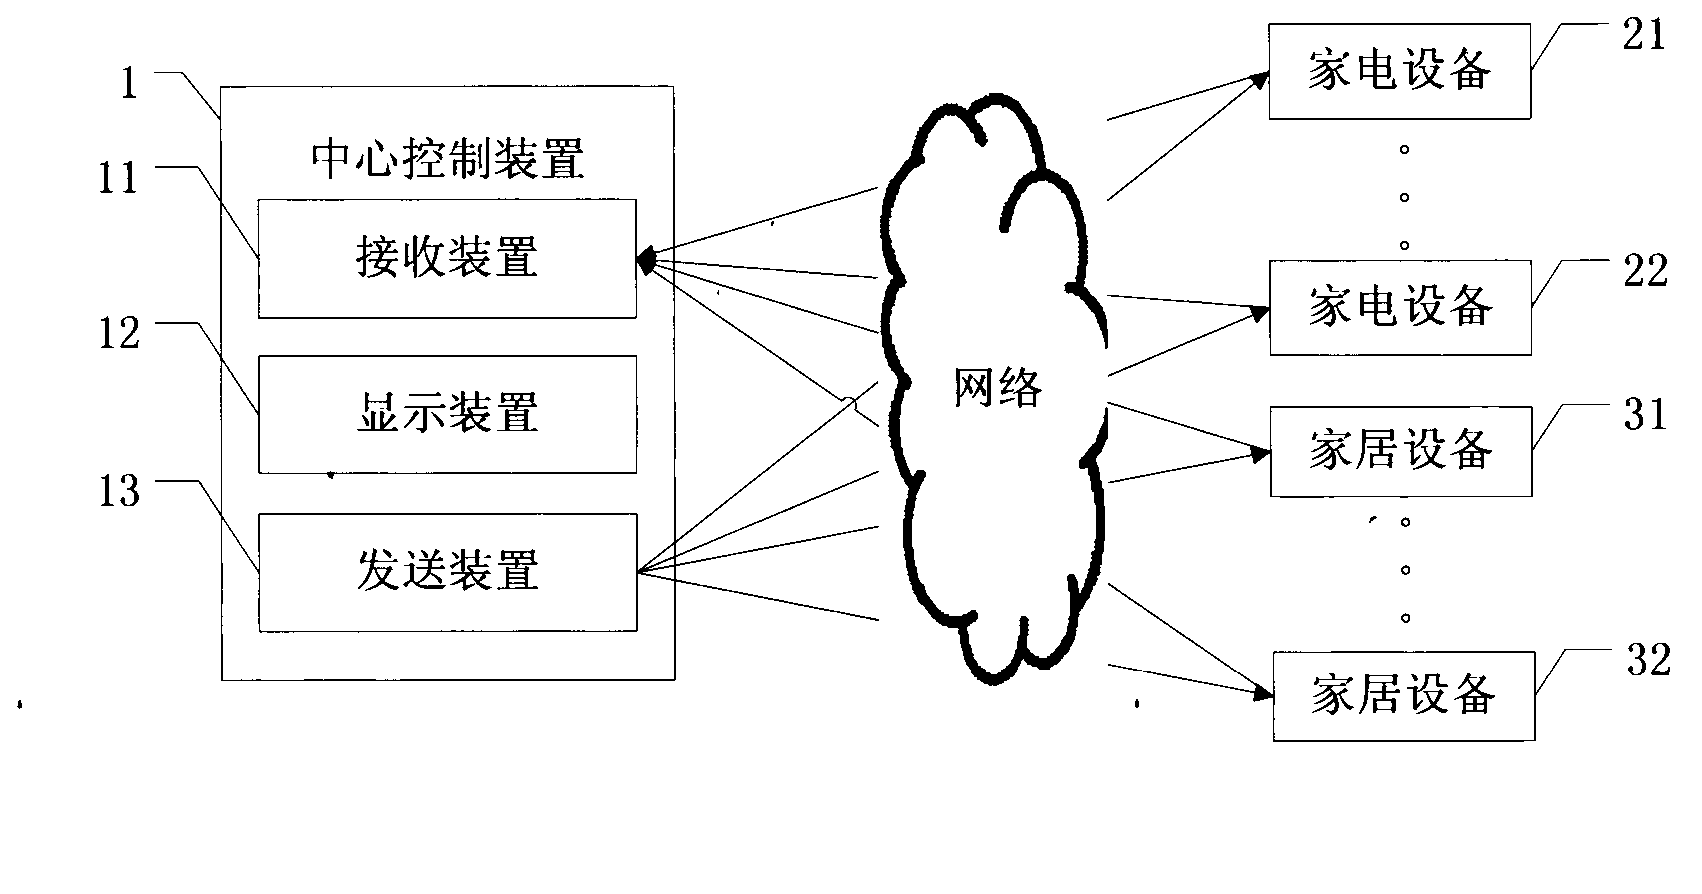 Intelligence appliance home control device and refrigerator embedded with the same